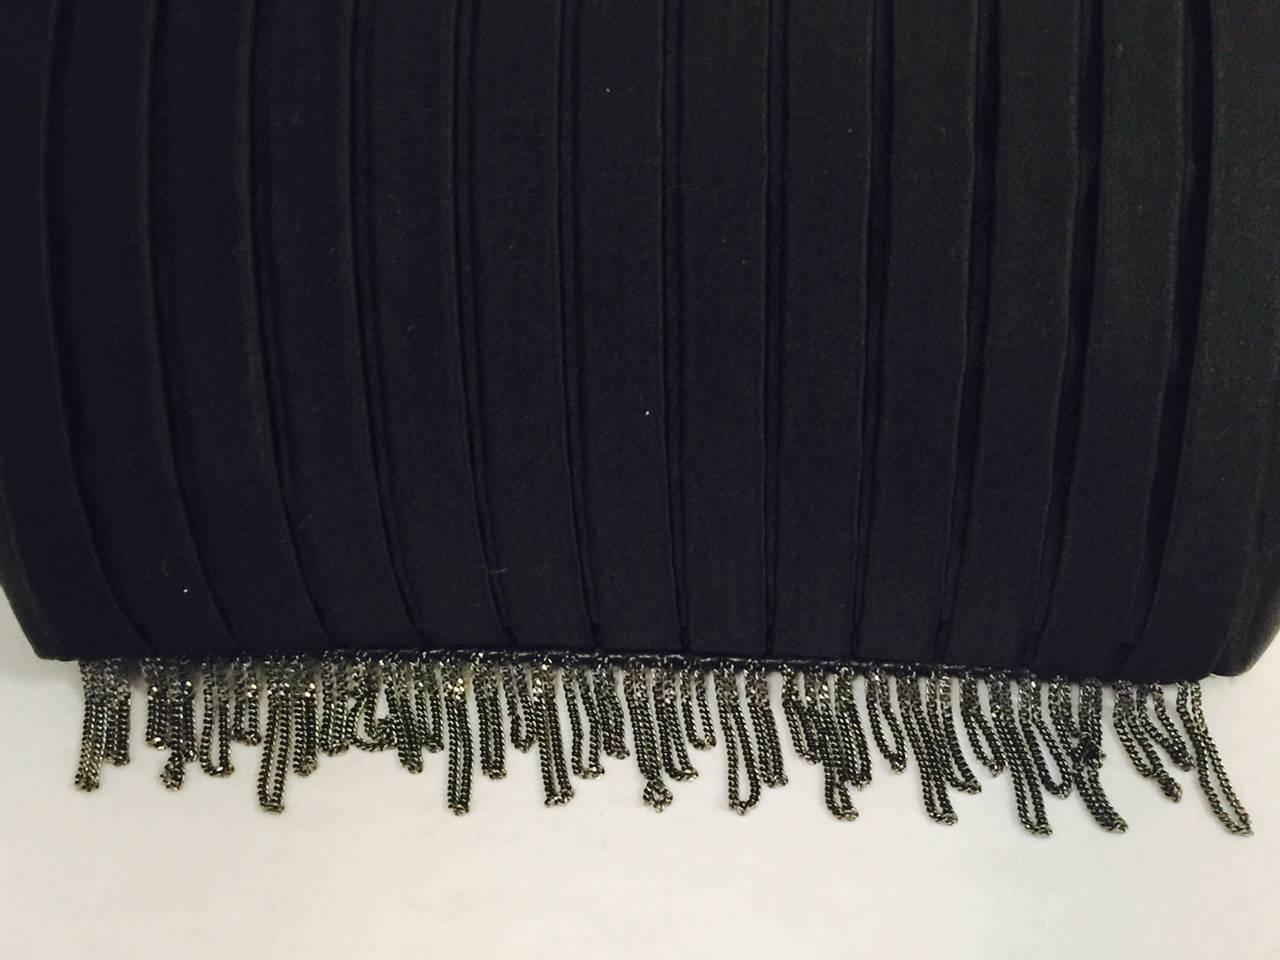 Limited Edition Chanel Black Satin Pleated Evening Bag with Chain Fringe 2